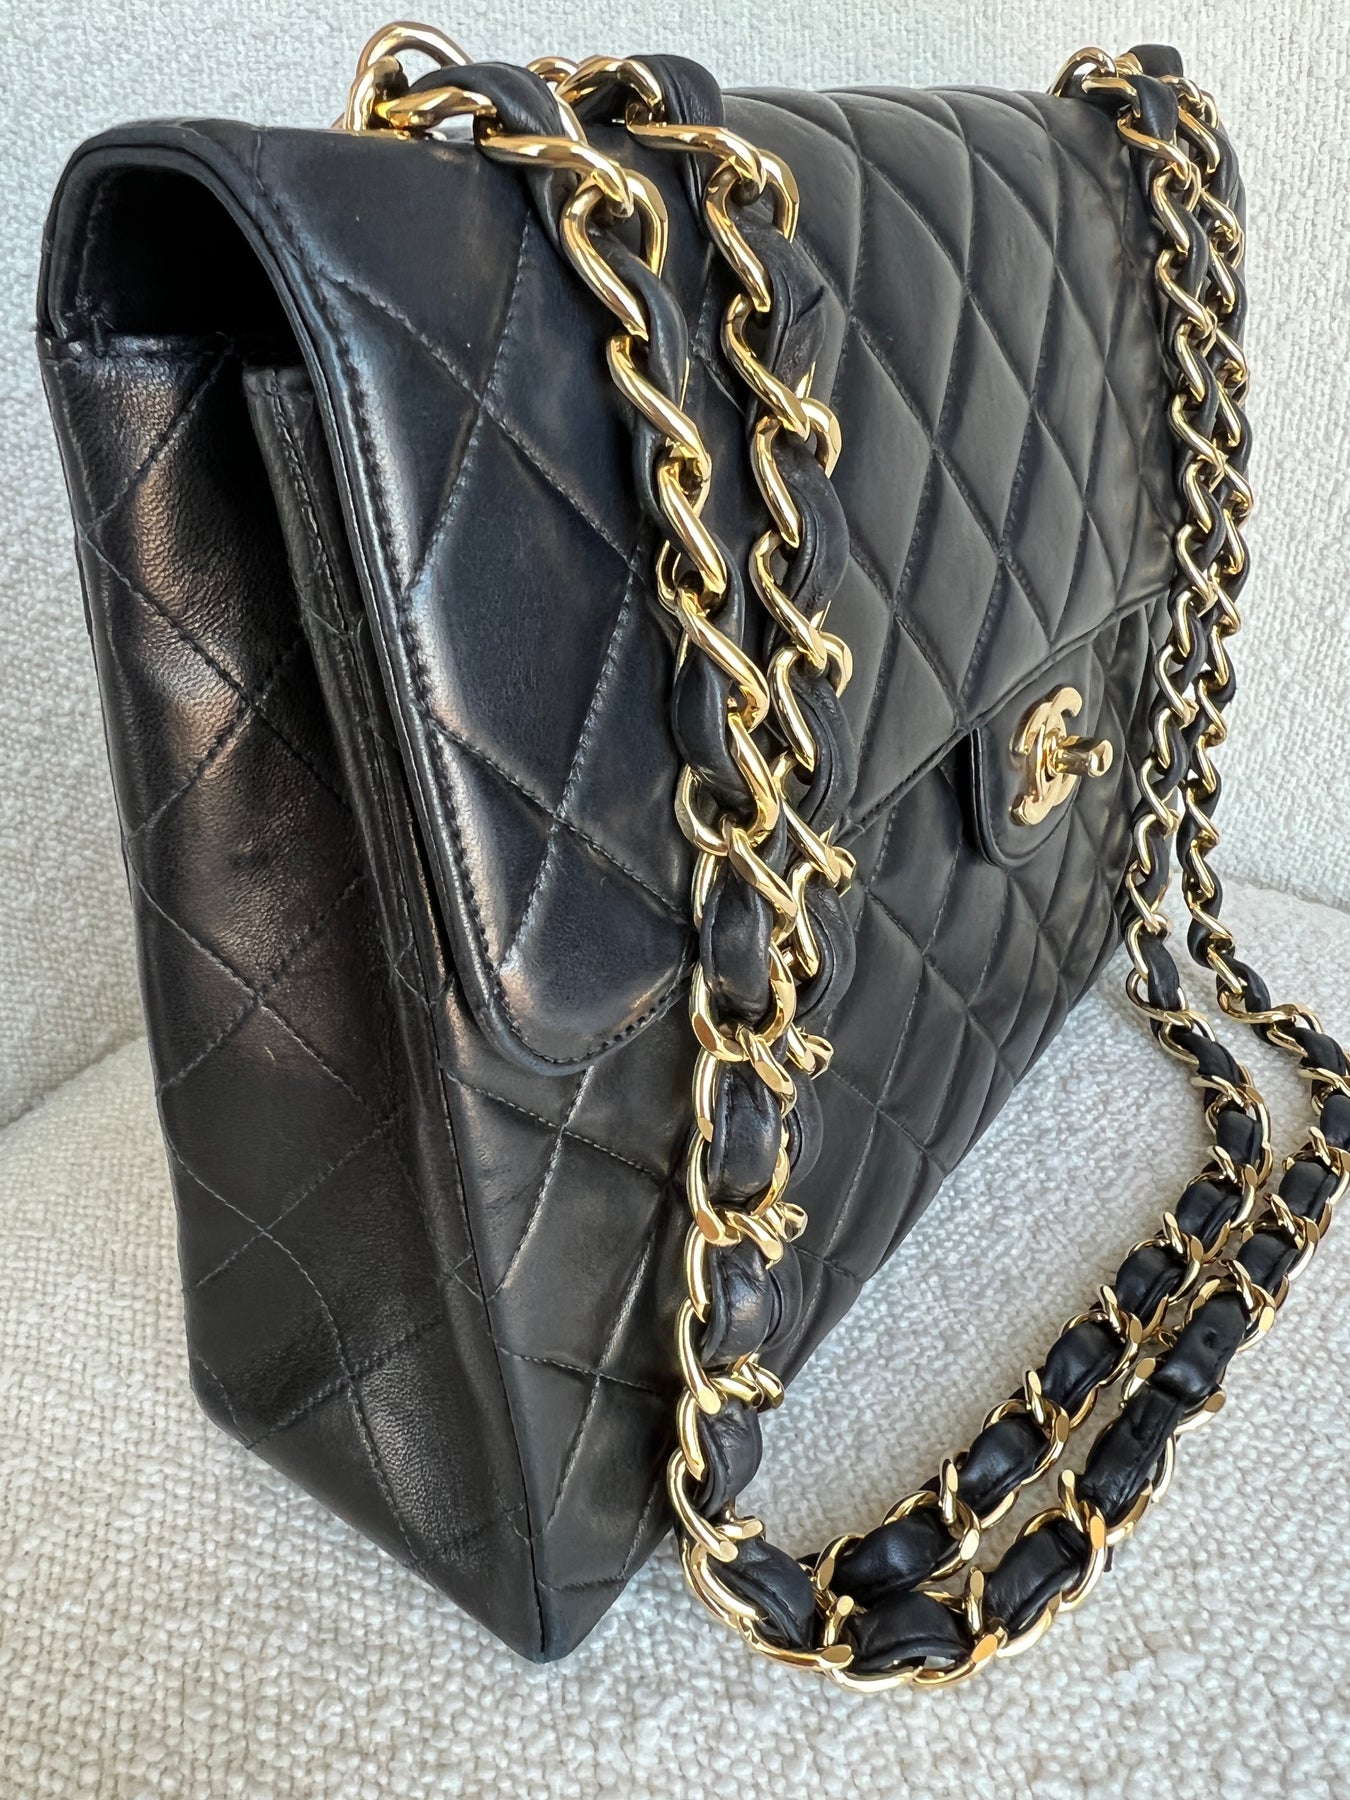 Chanel Vintage Jumbo Single Flap Bag In Black Lambskin With Gold Hardware  SOLD